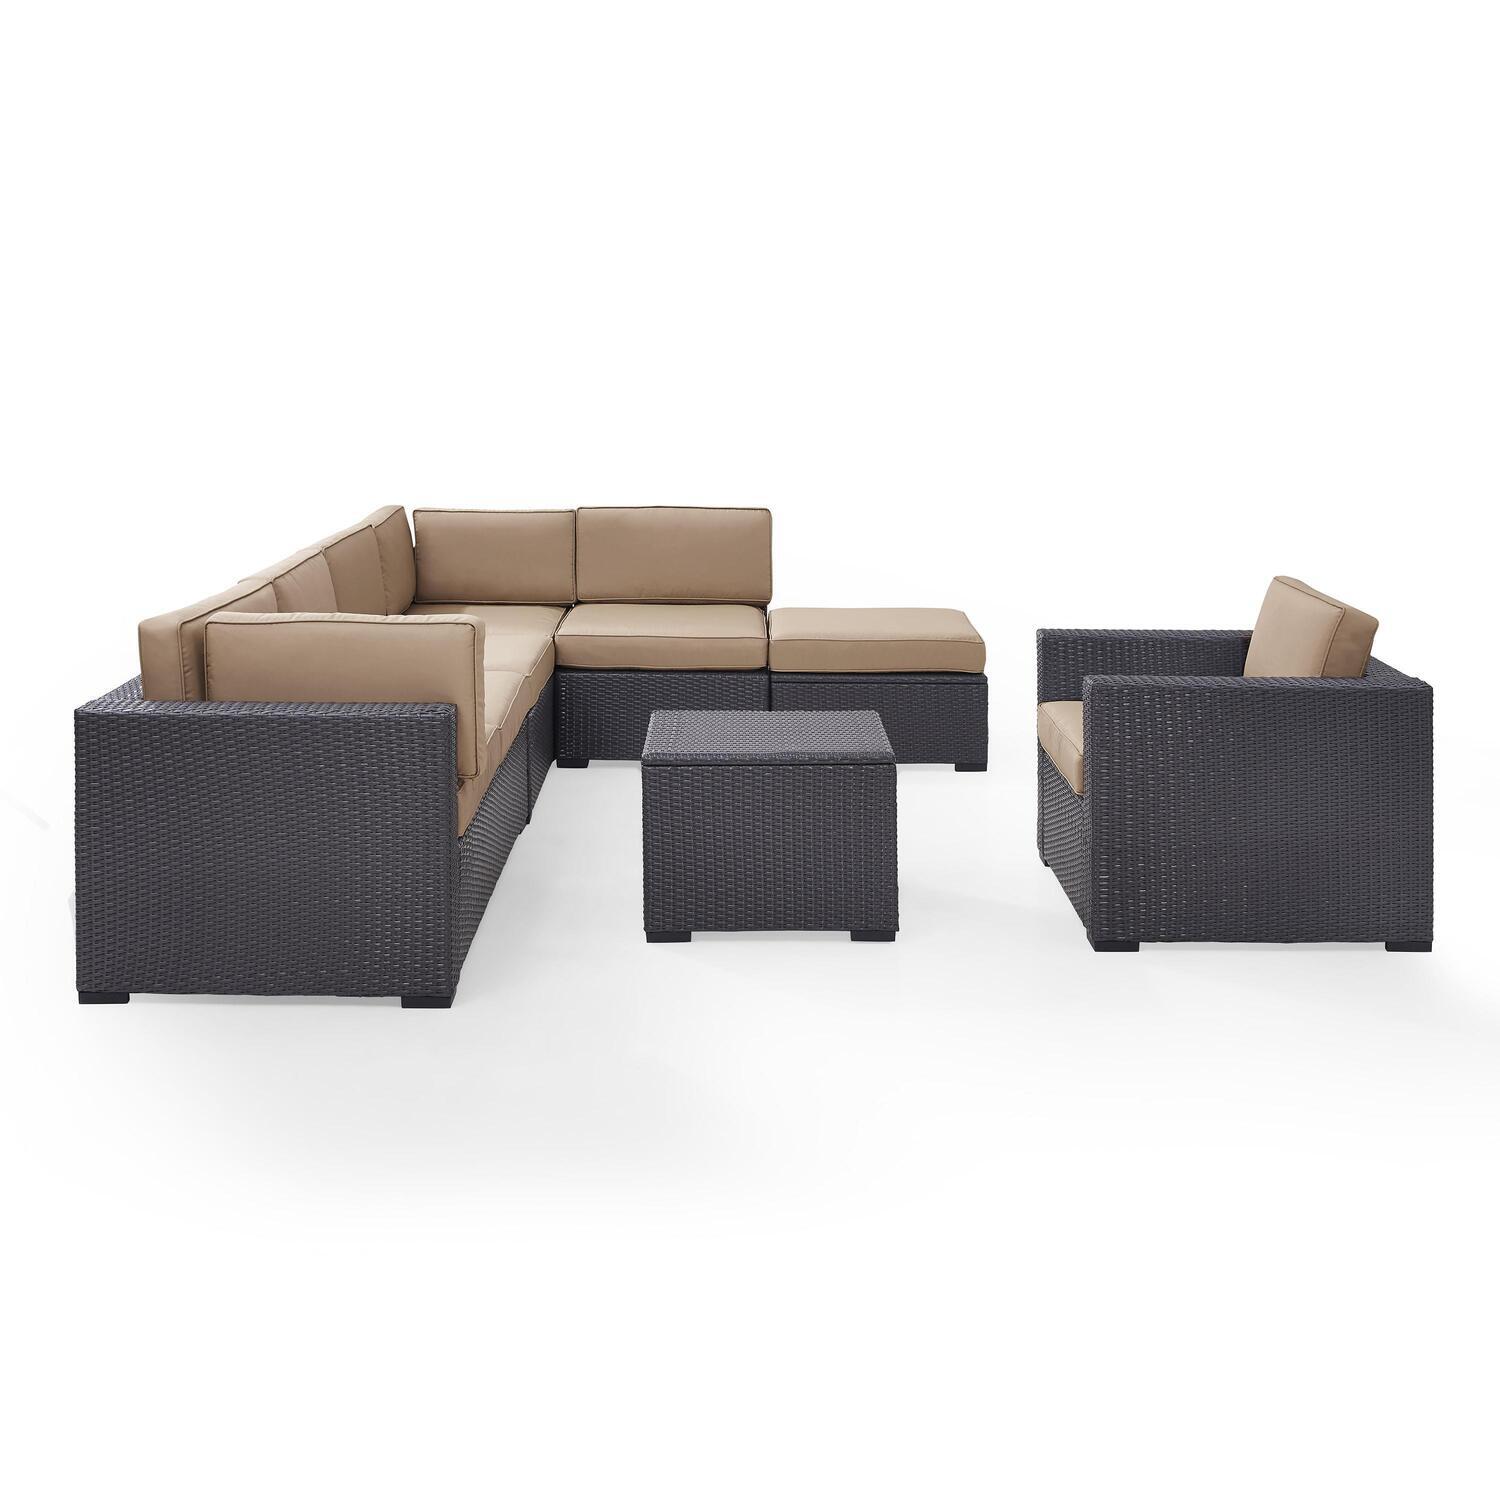 Biscayne 7 Person Outdoor Wicker Seating Set In Mocha - Two Loveseats, One Armless Chair, One Arm Chair, Coffee Table, Ottoman - image 1 of 4